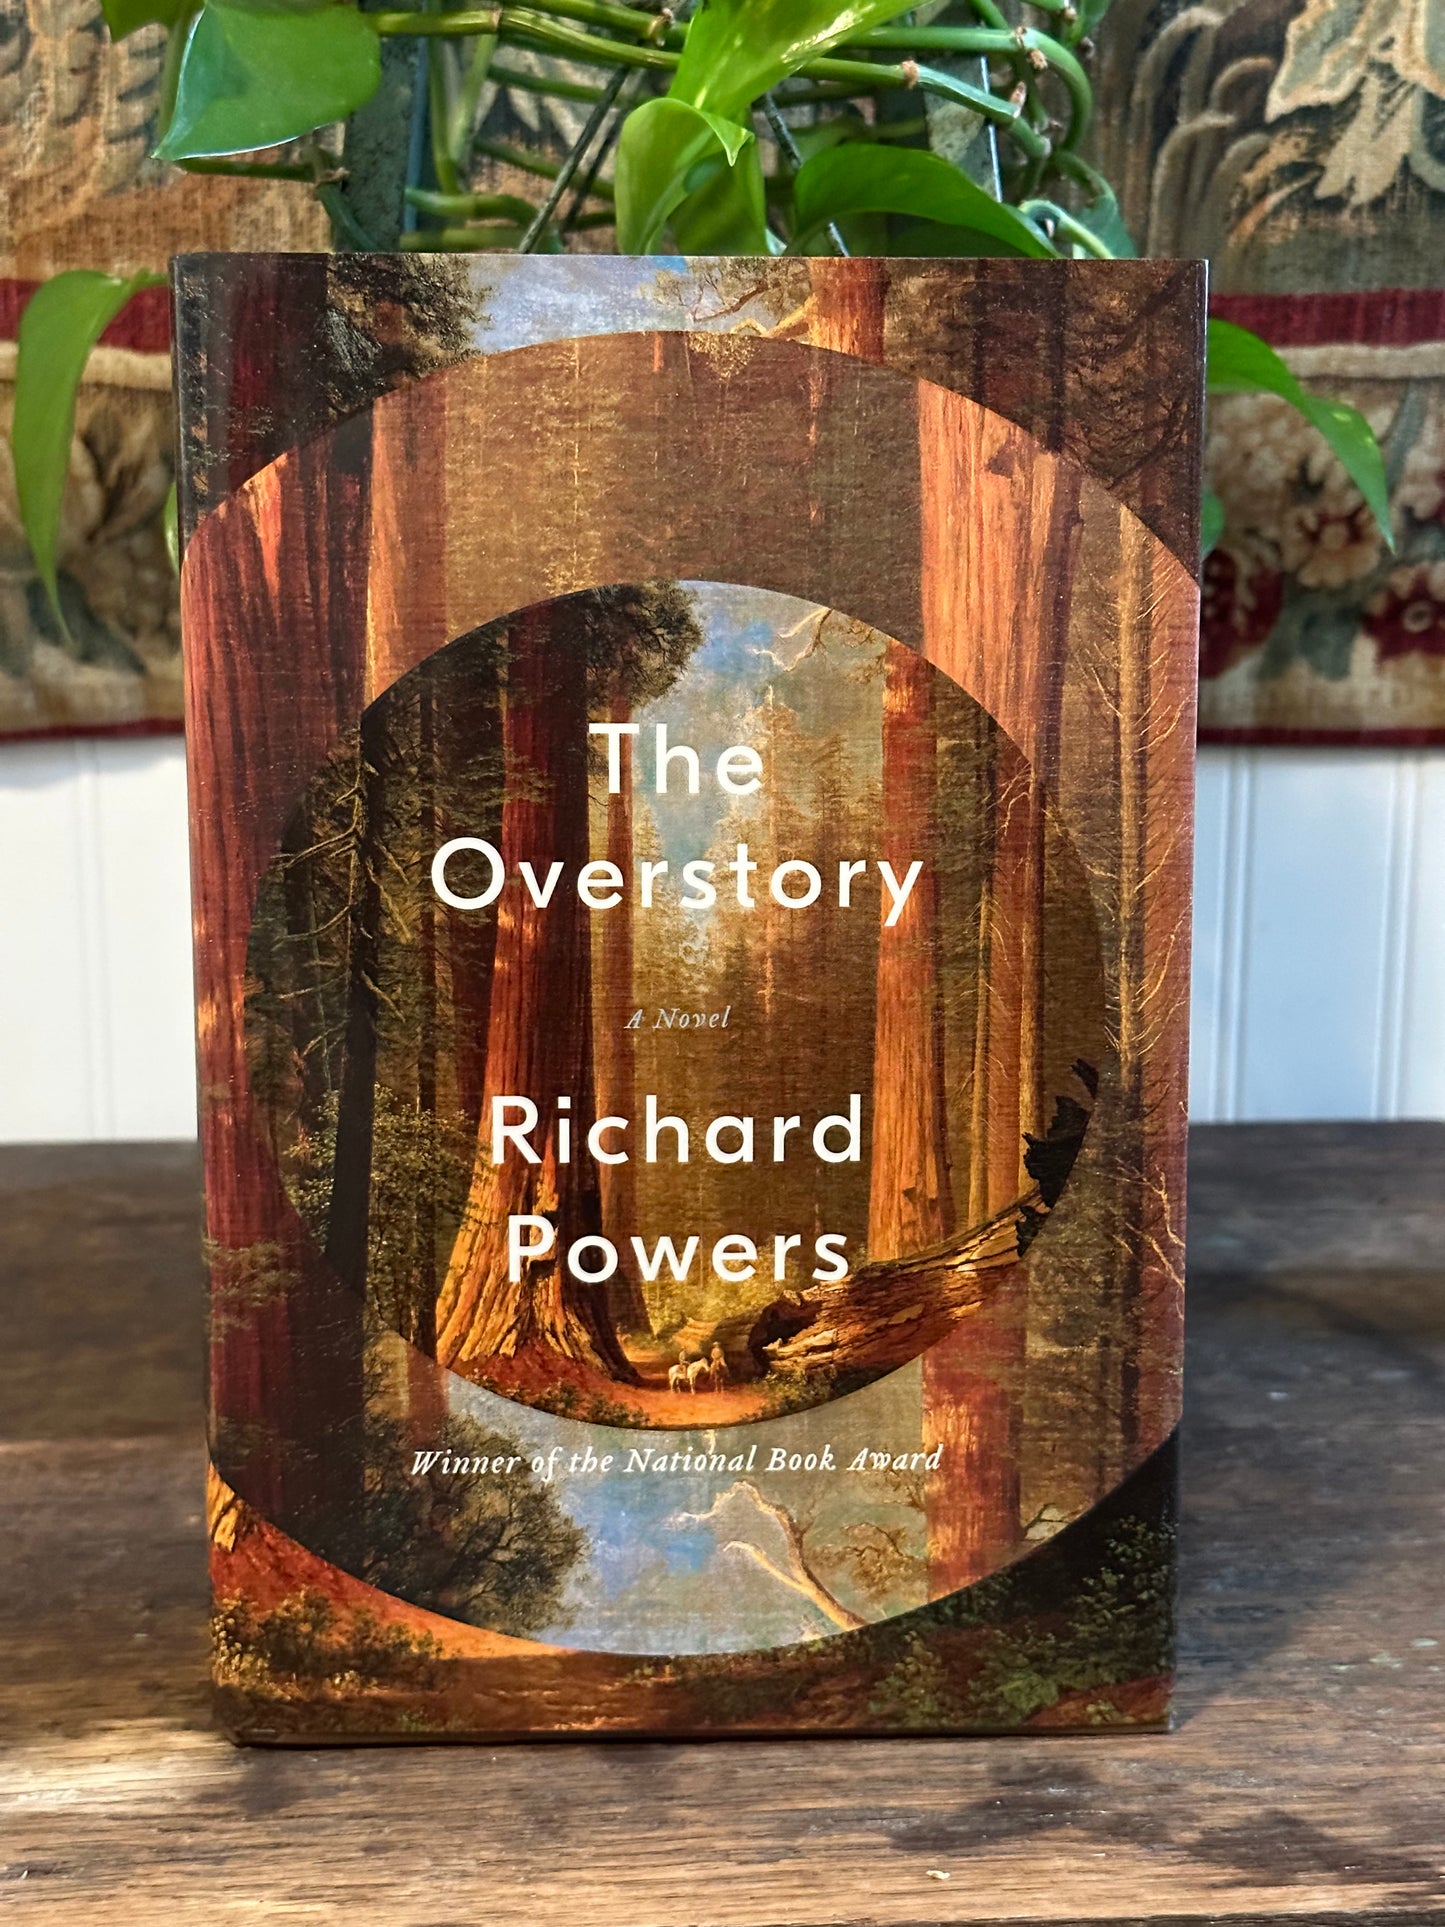 The Overstory by Richard Powers (First Edition)